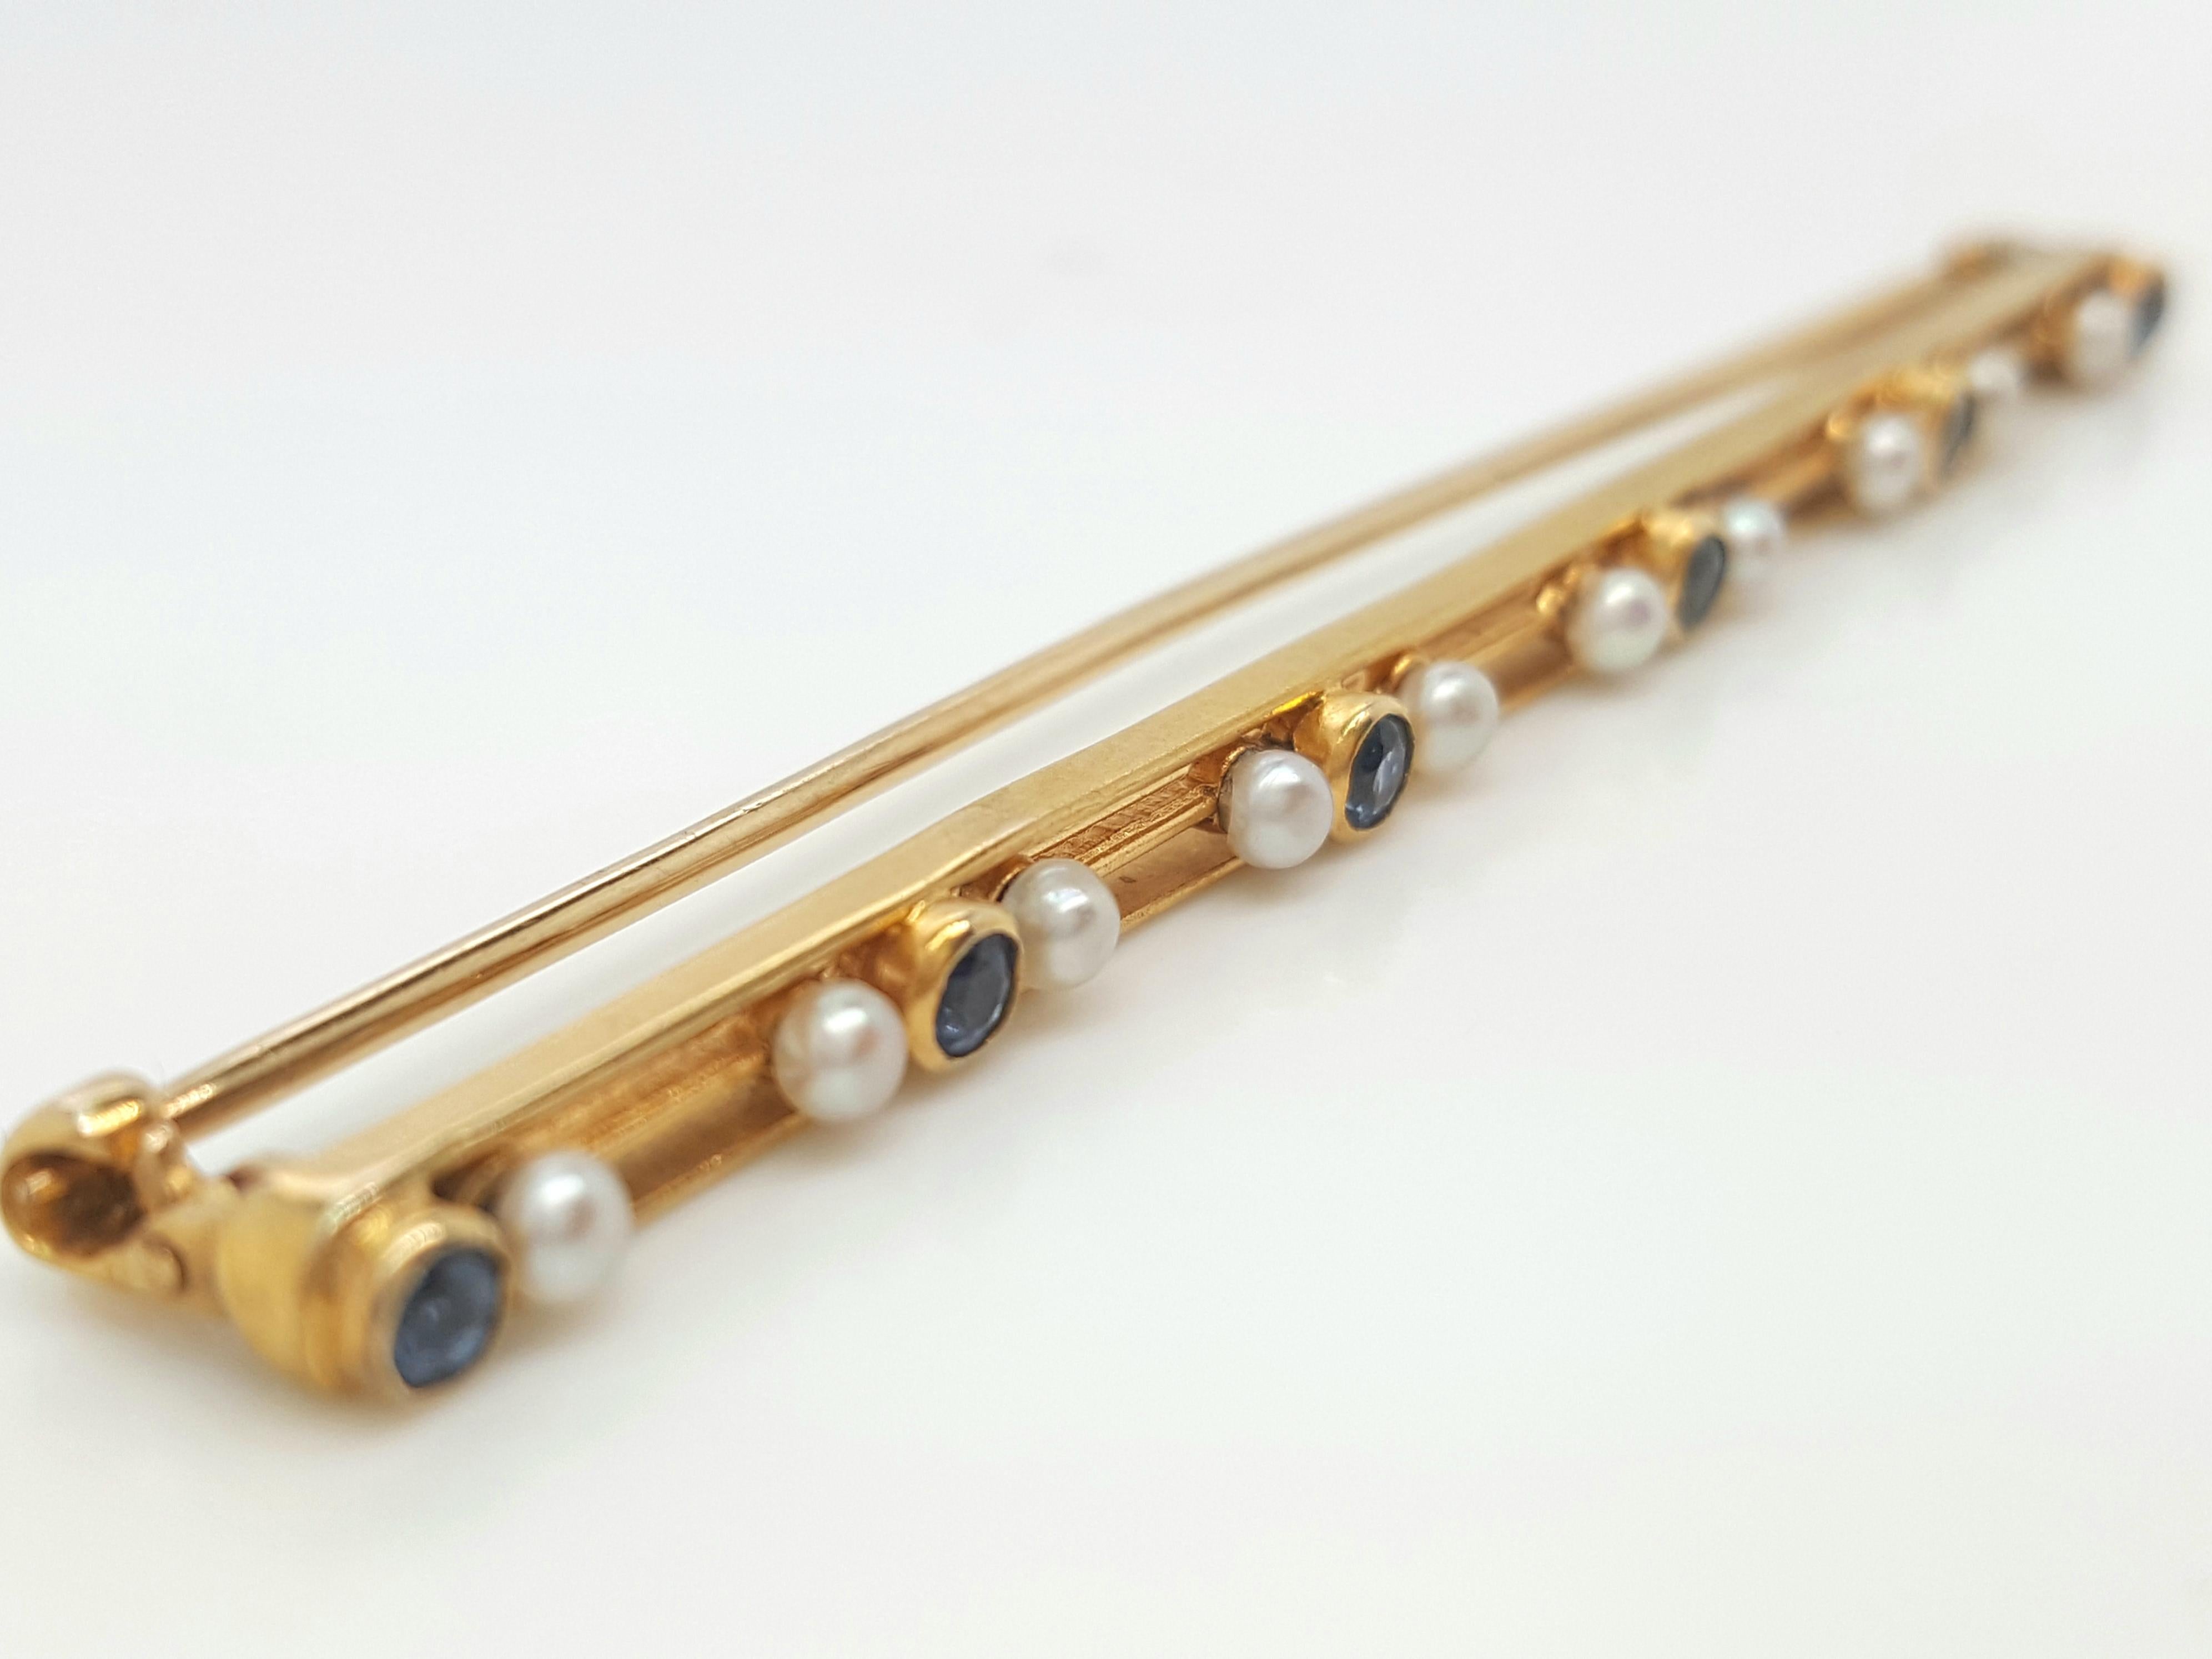 Art Deco 14 Karat Yellow Gold Sapphire and Seed Pearl Bar Brooch. This chic brooch features six round blue sapphires bezel set in between seed pearls that are the perfect feminine accent, all are set in 14 karat yellow gold,  completed by a pinstem